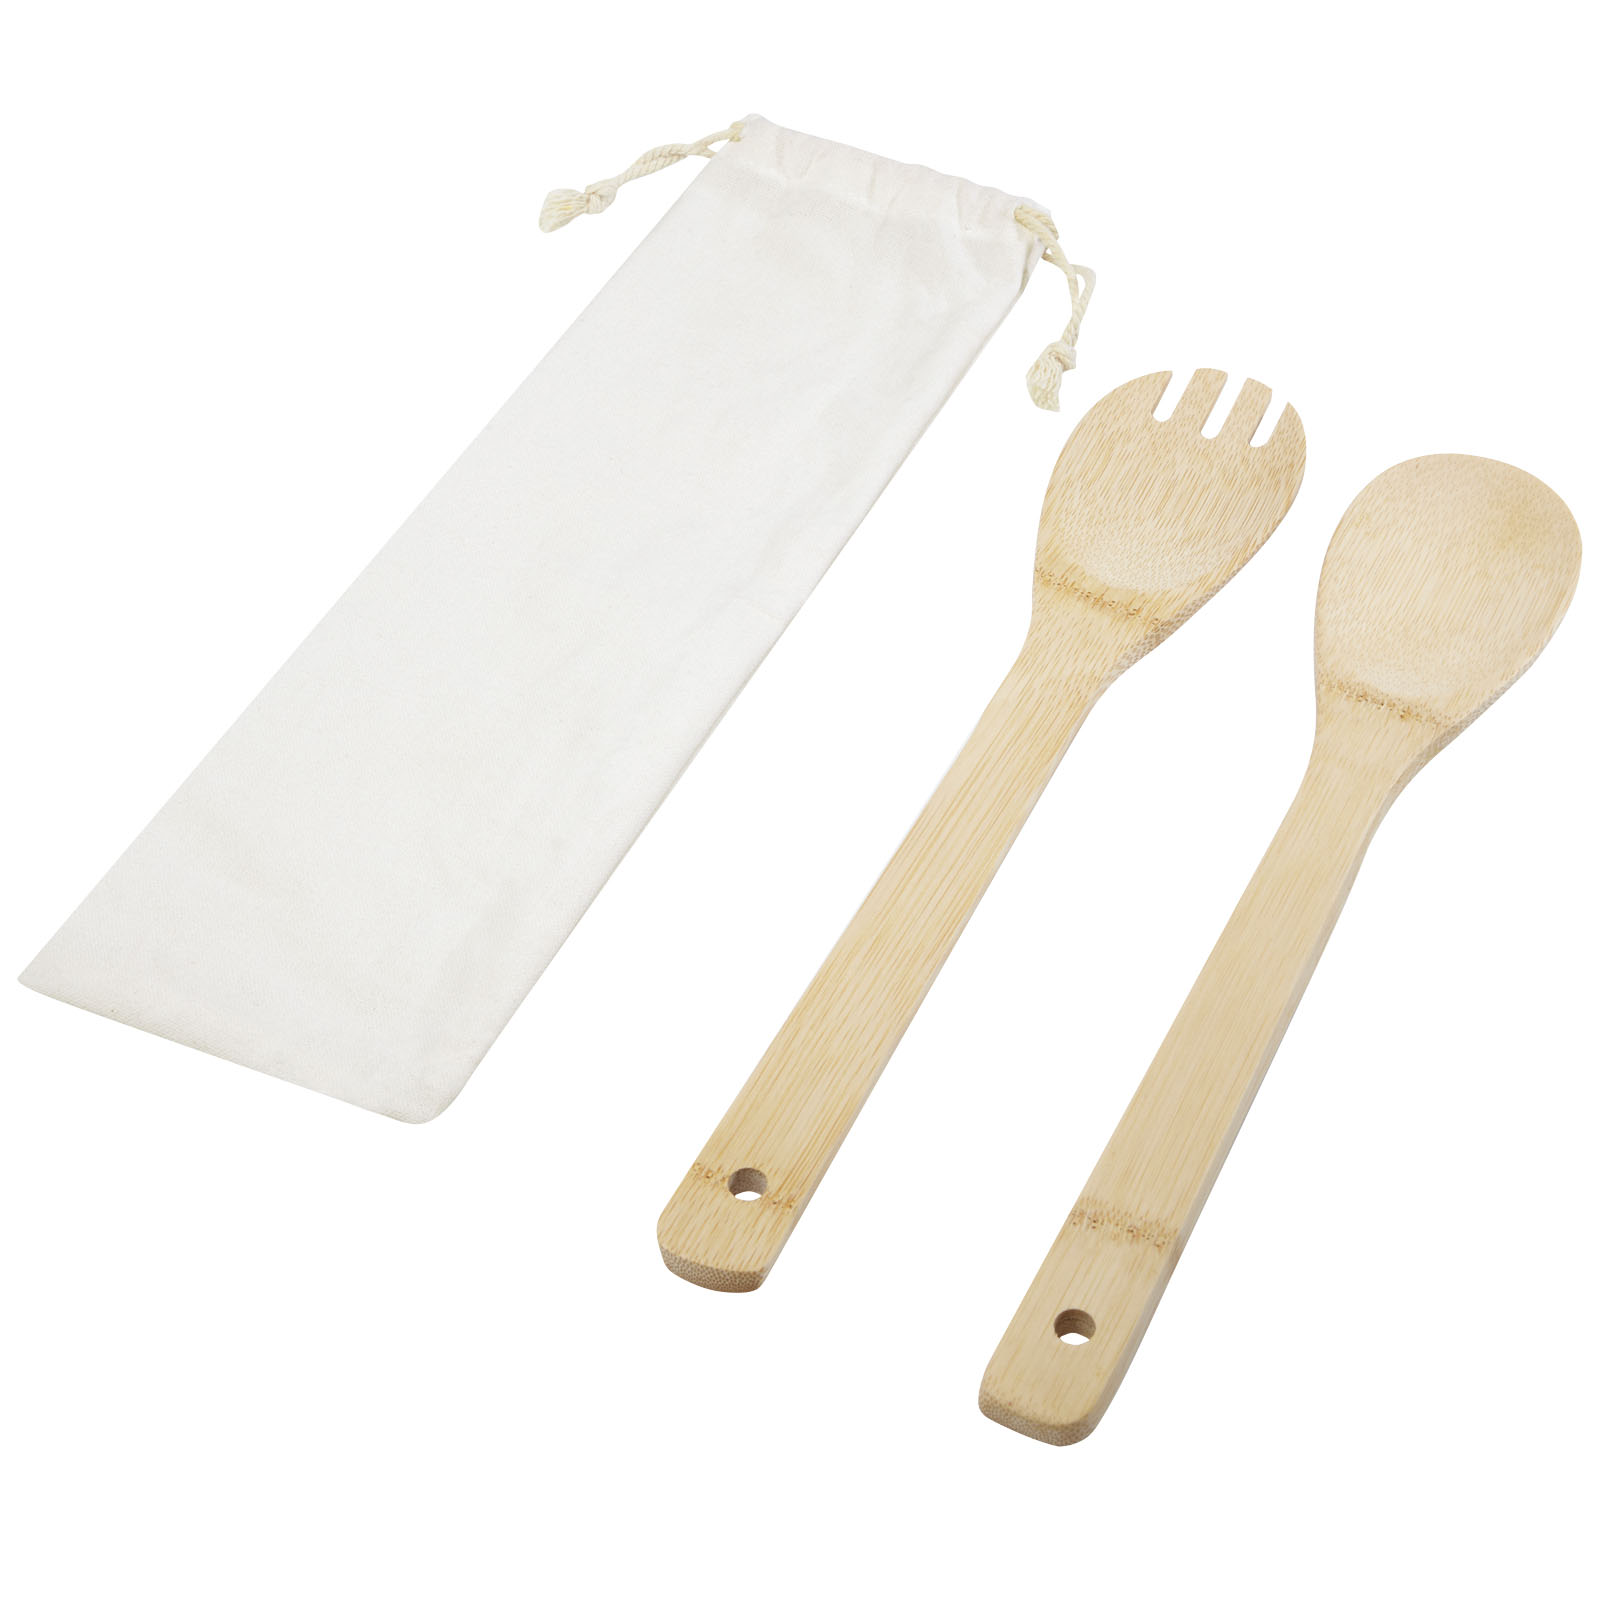 Home & Kitchen - Endiv bamboo salad spoon and fork